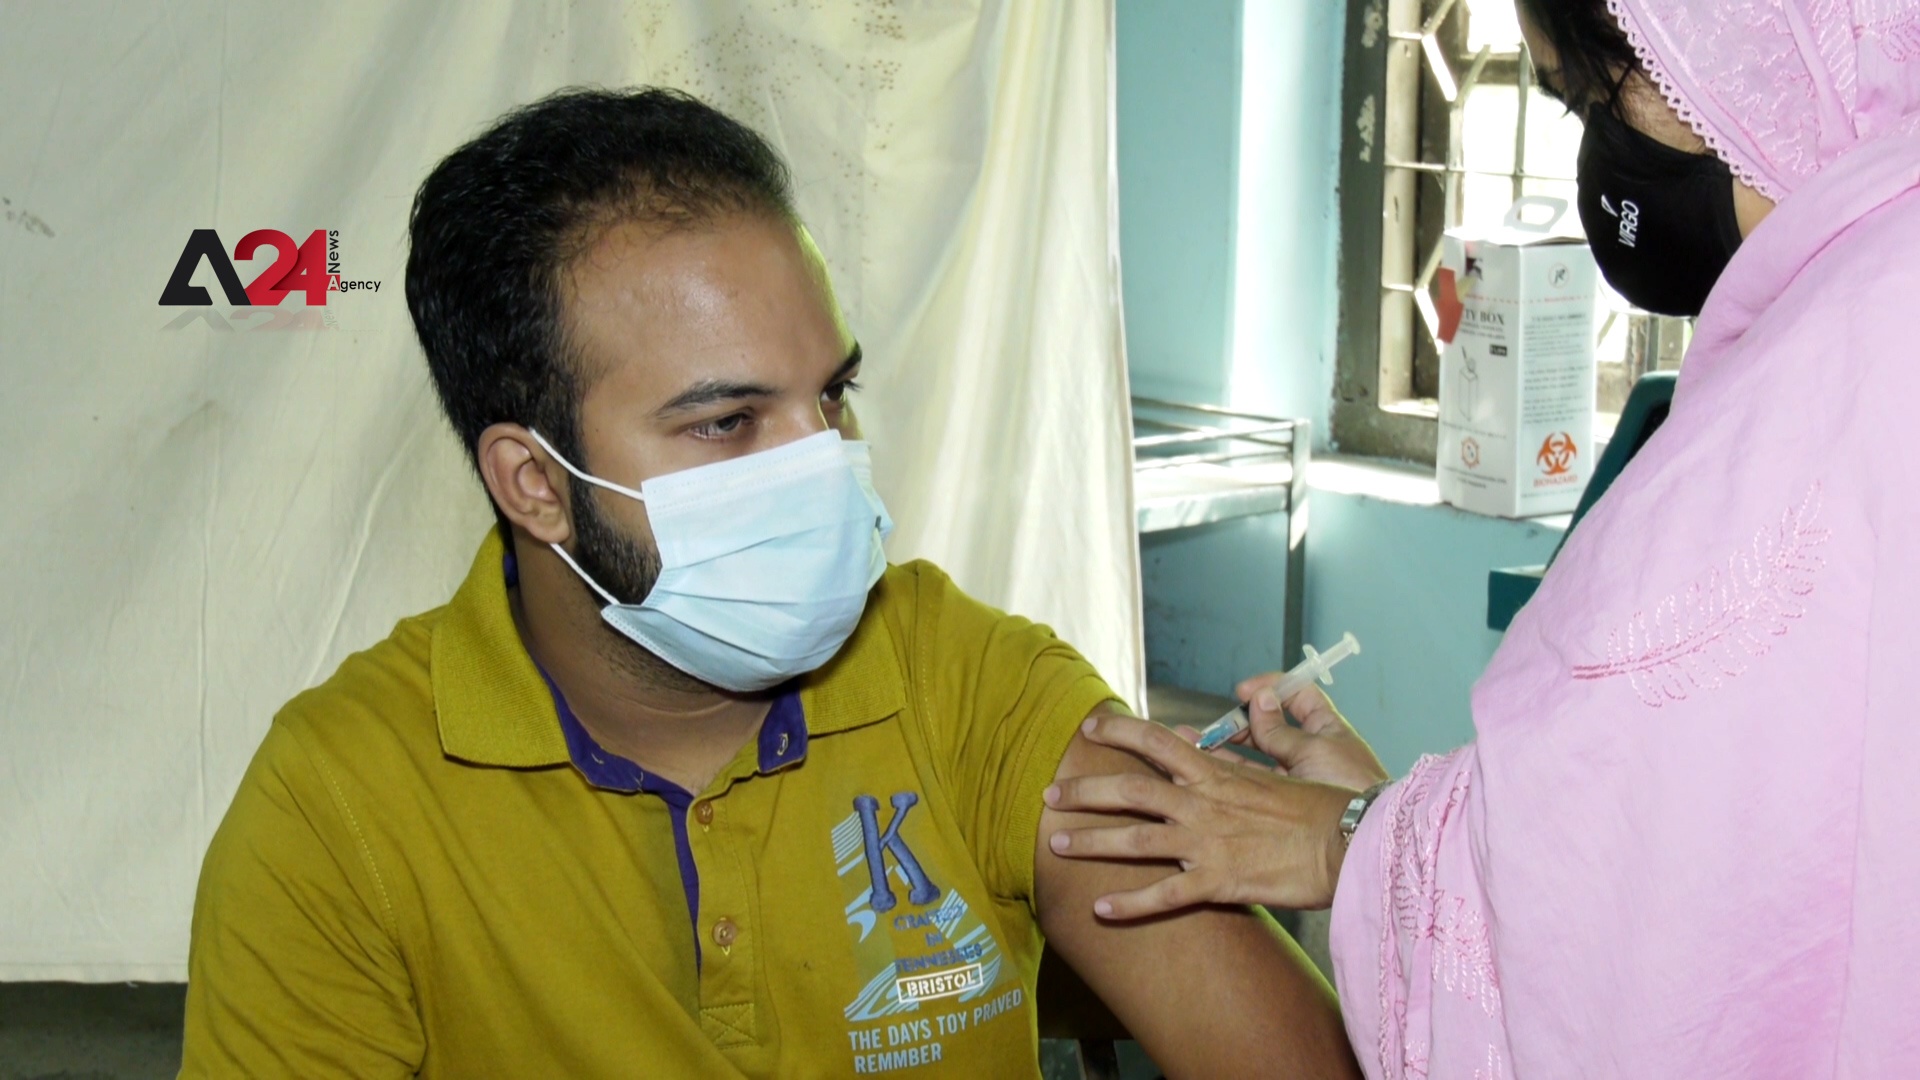 Bangladesh - Partial disruption in the vaccination process due to reliance on Chinese vaccines